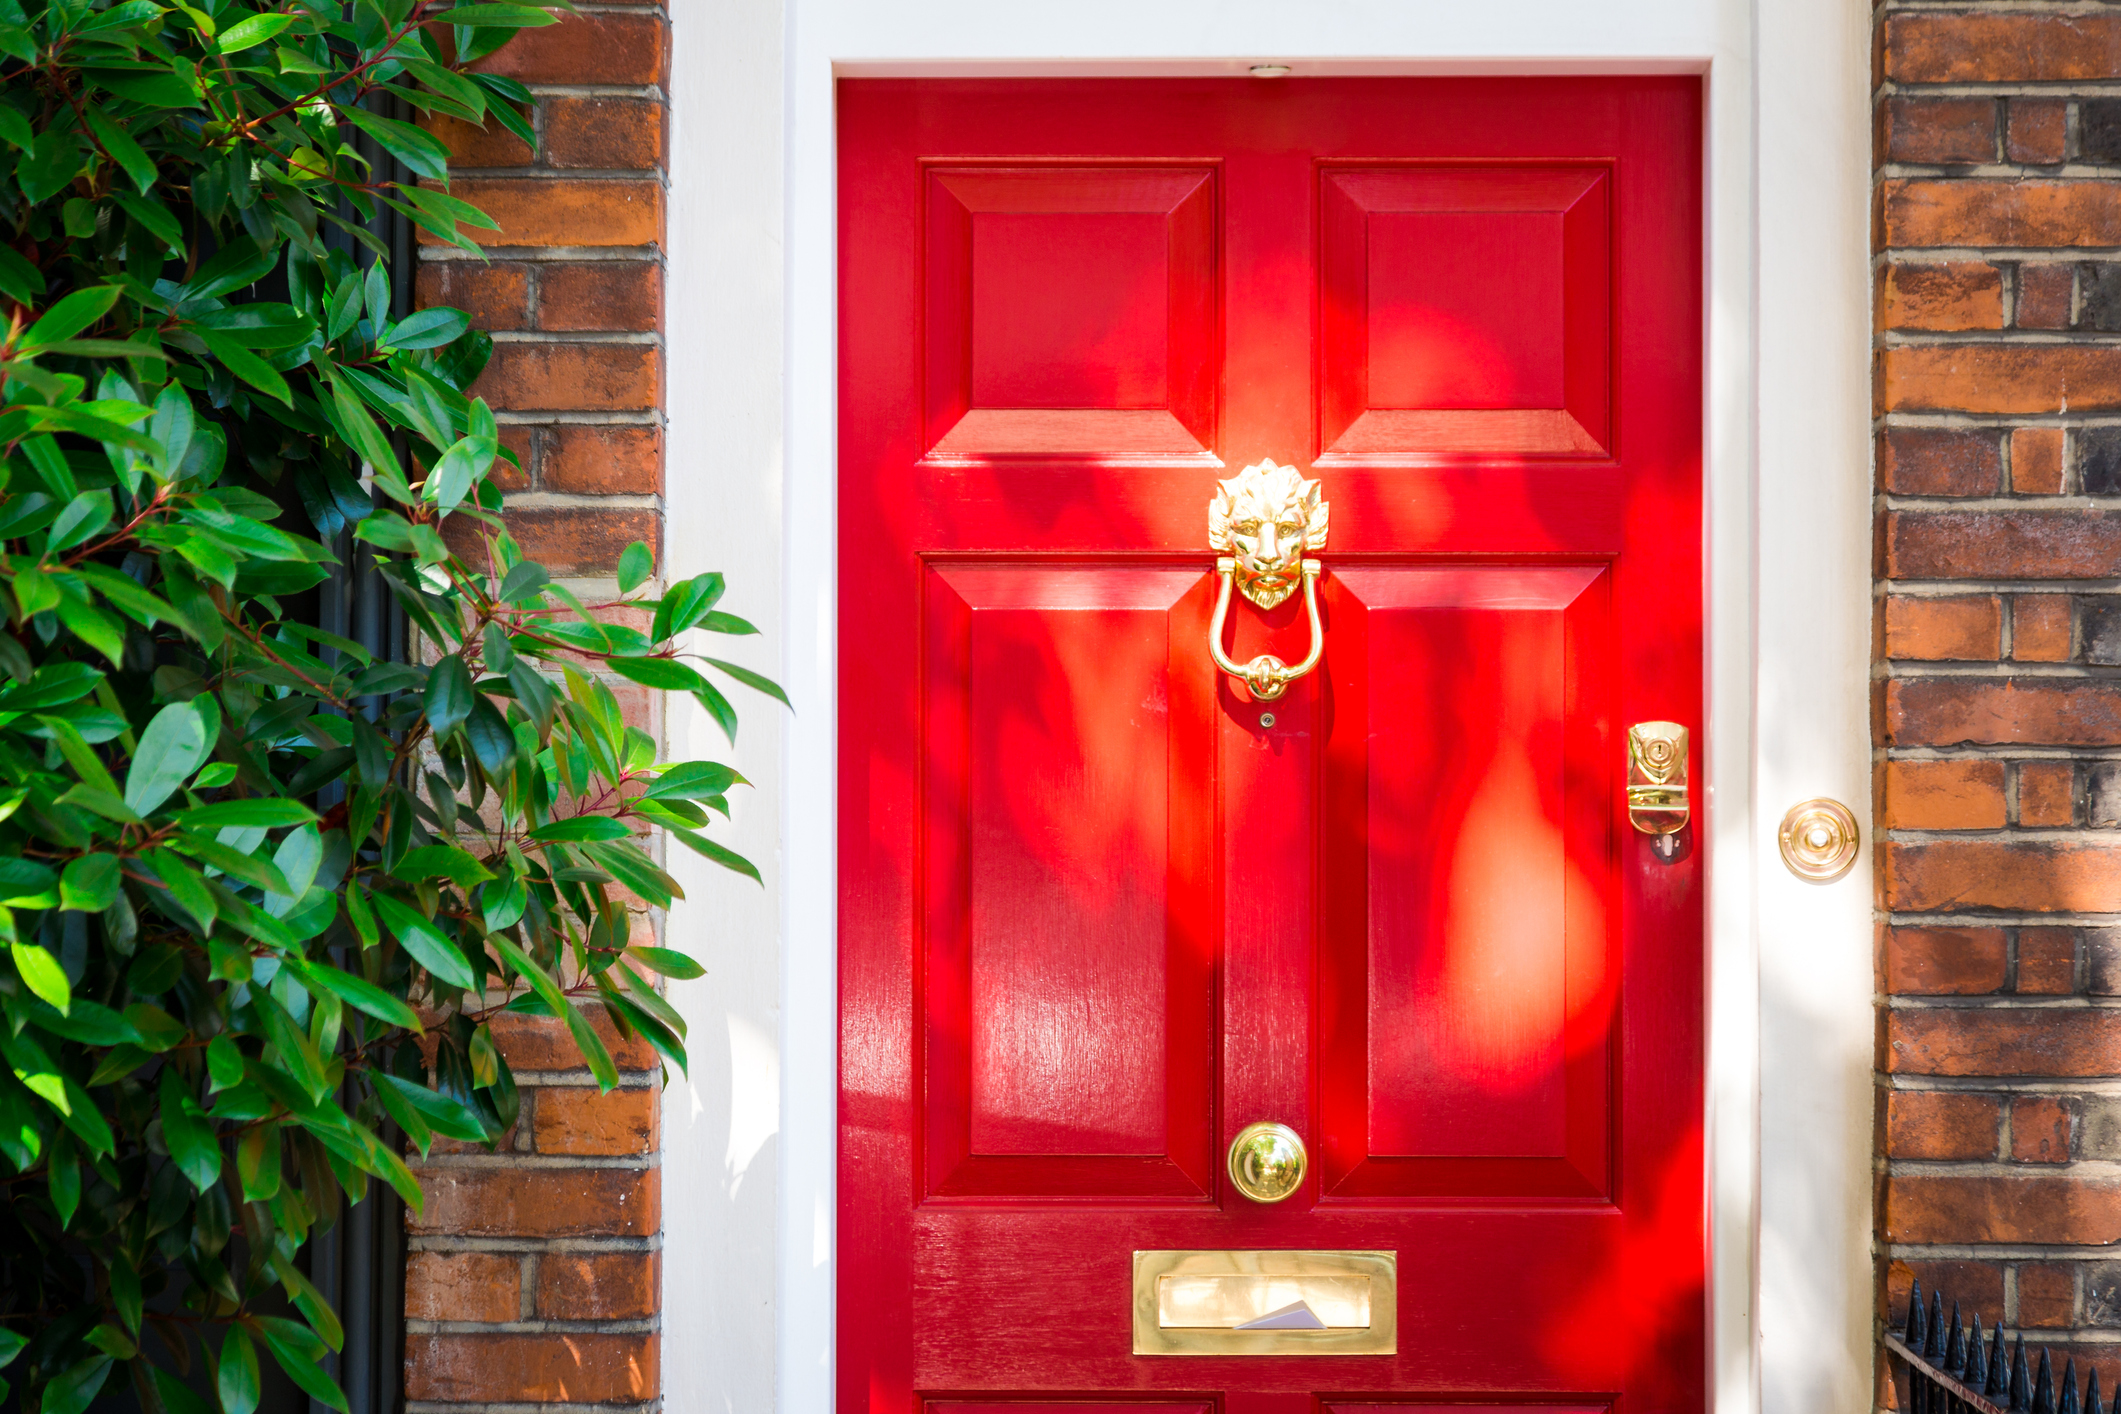 Color image depicting the exterior of a building on a traditional city street in Belgravia, an affluent area of London, UK. The house has a pretty red door, red brick walls, and the facade is decorated with a lush, verdant green bush. Room for copy space.